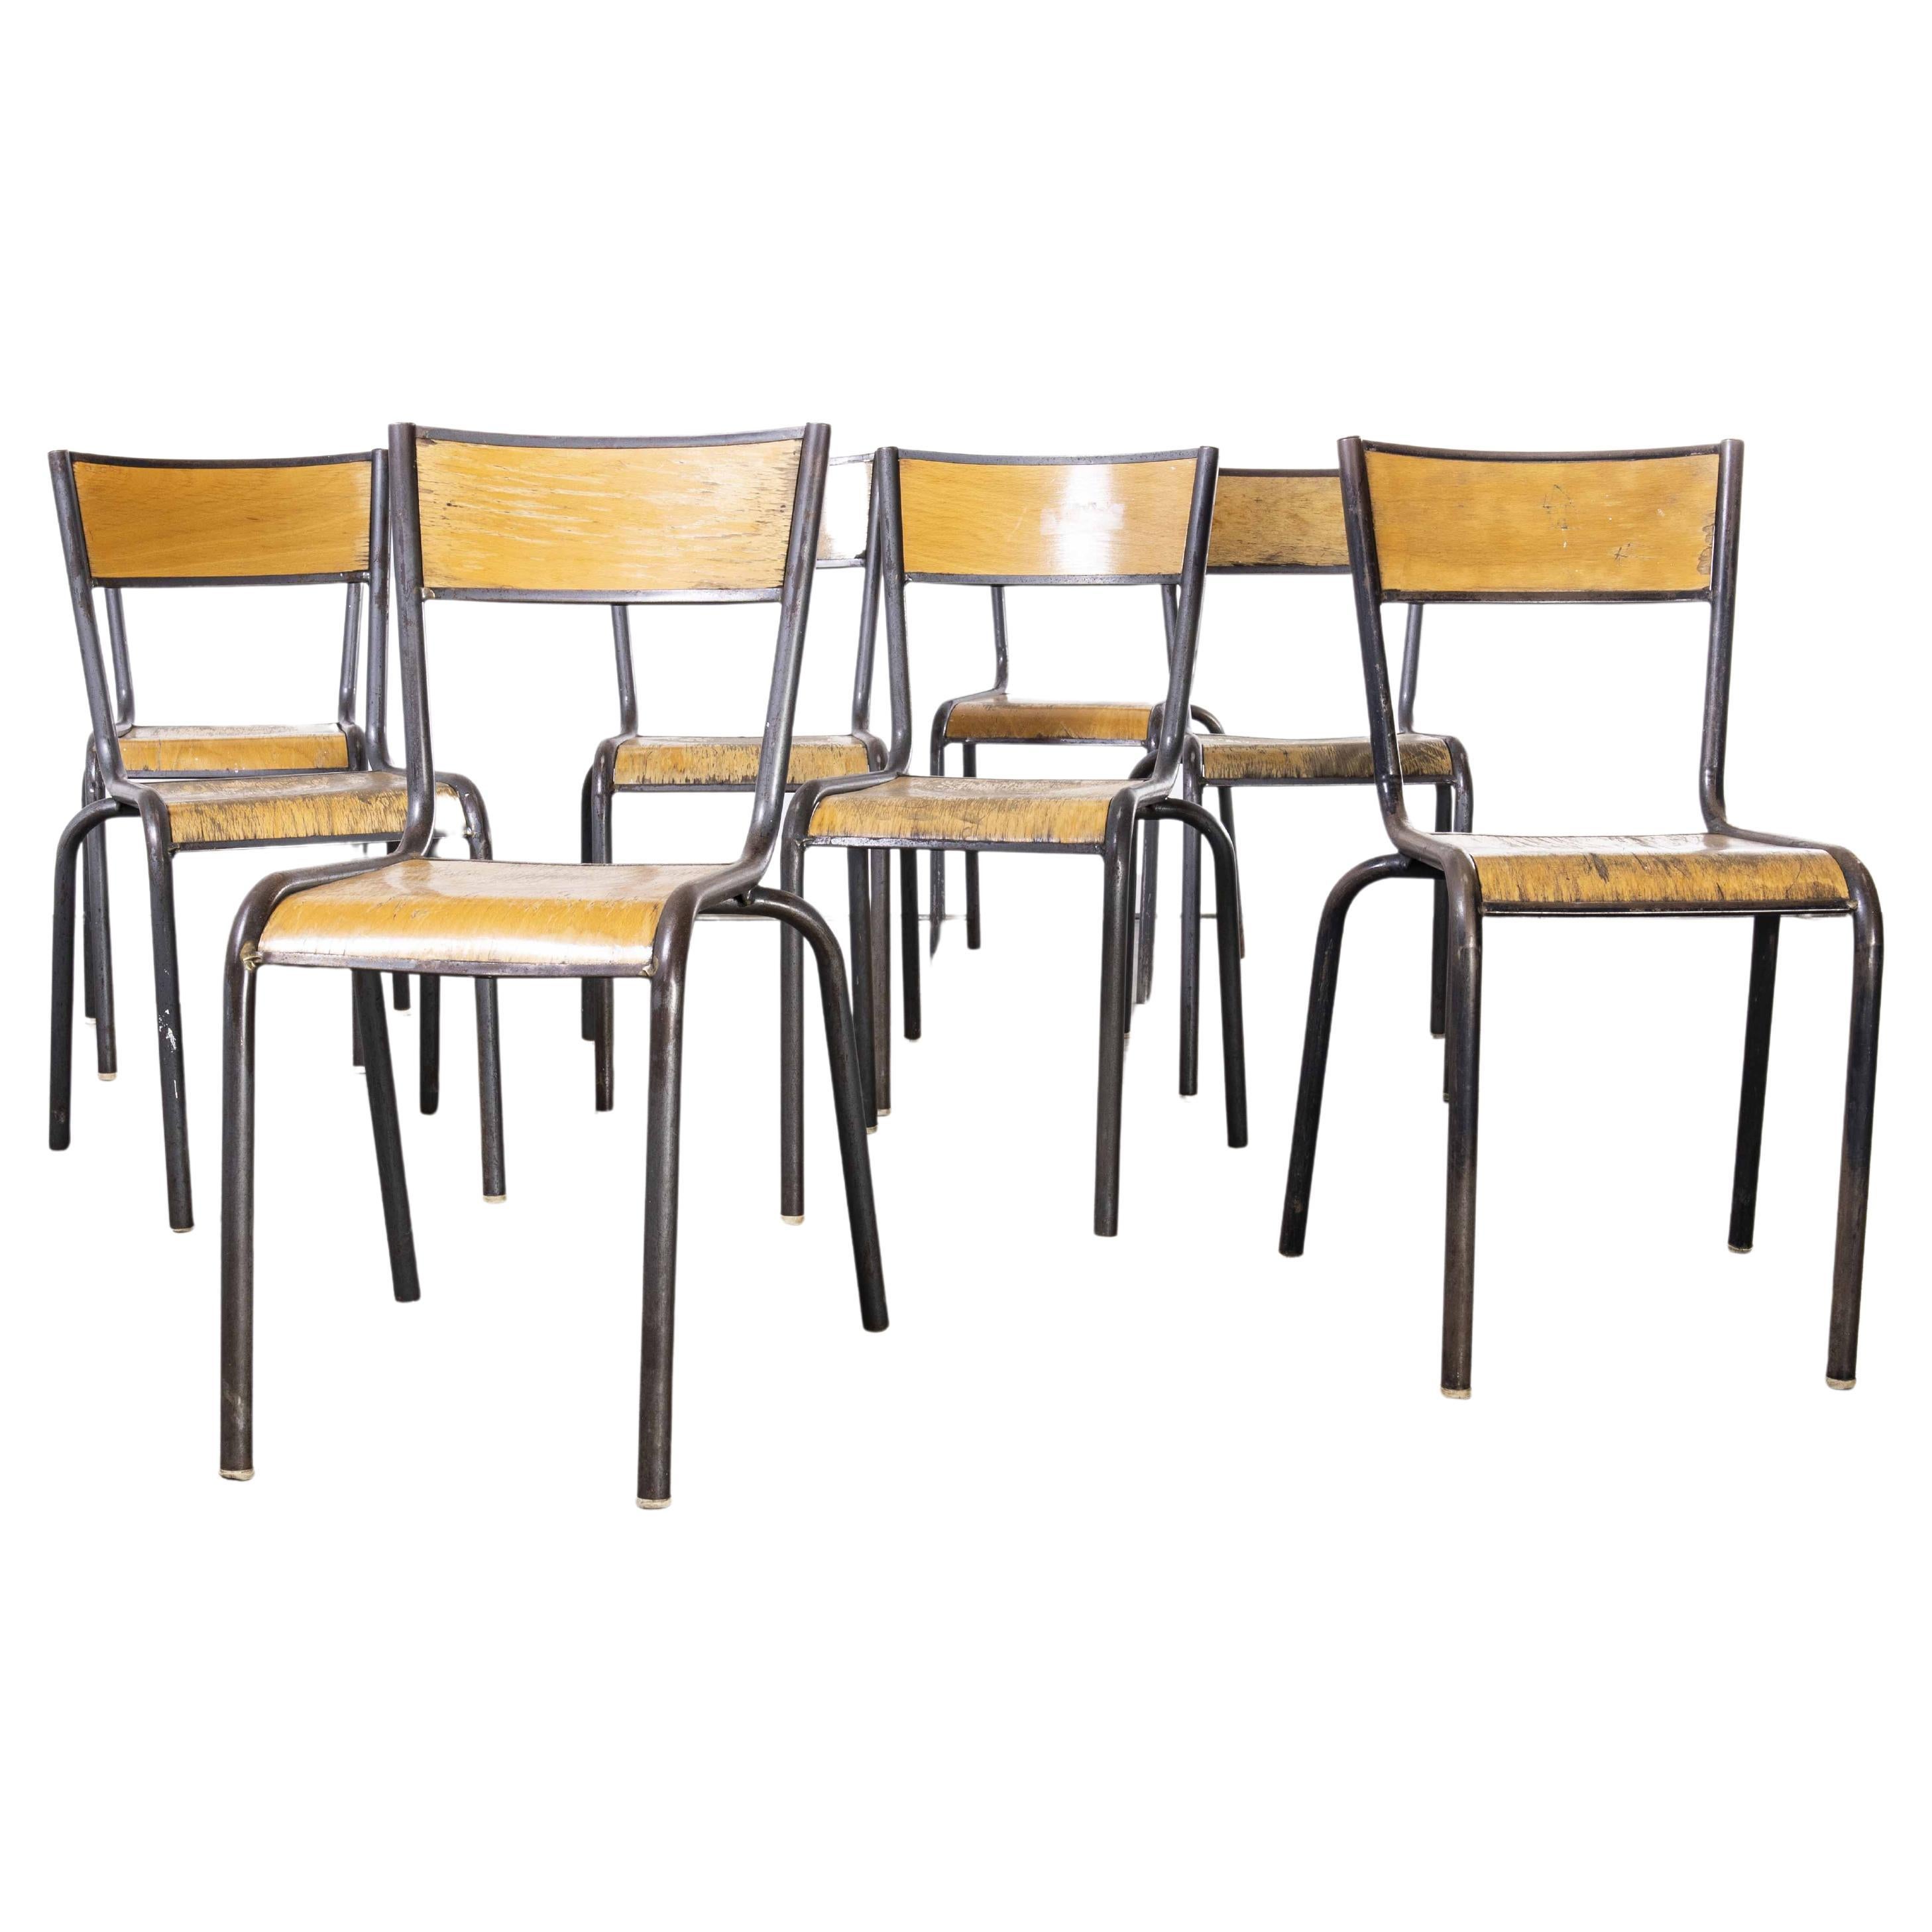 1960's French Mullca Stacking Chair 510, Graphite Frame, Set of Eight